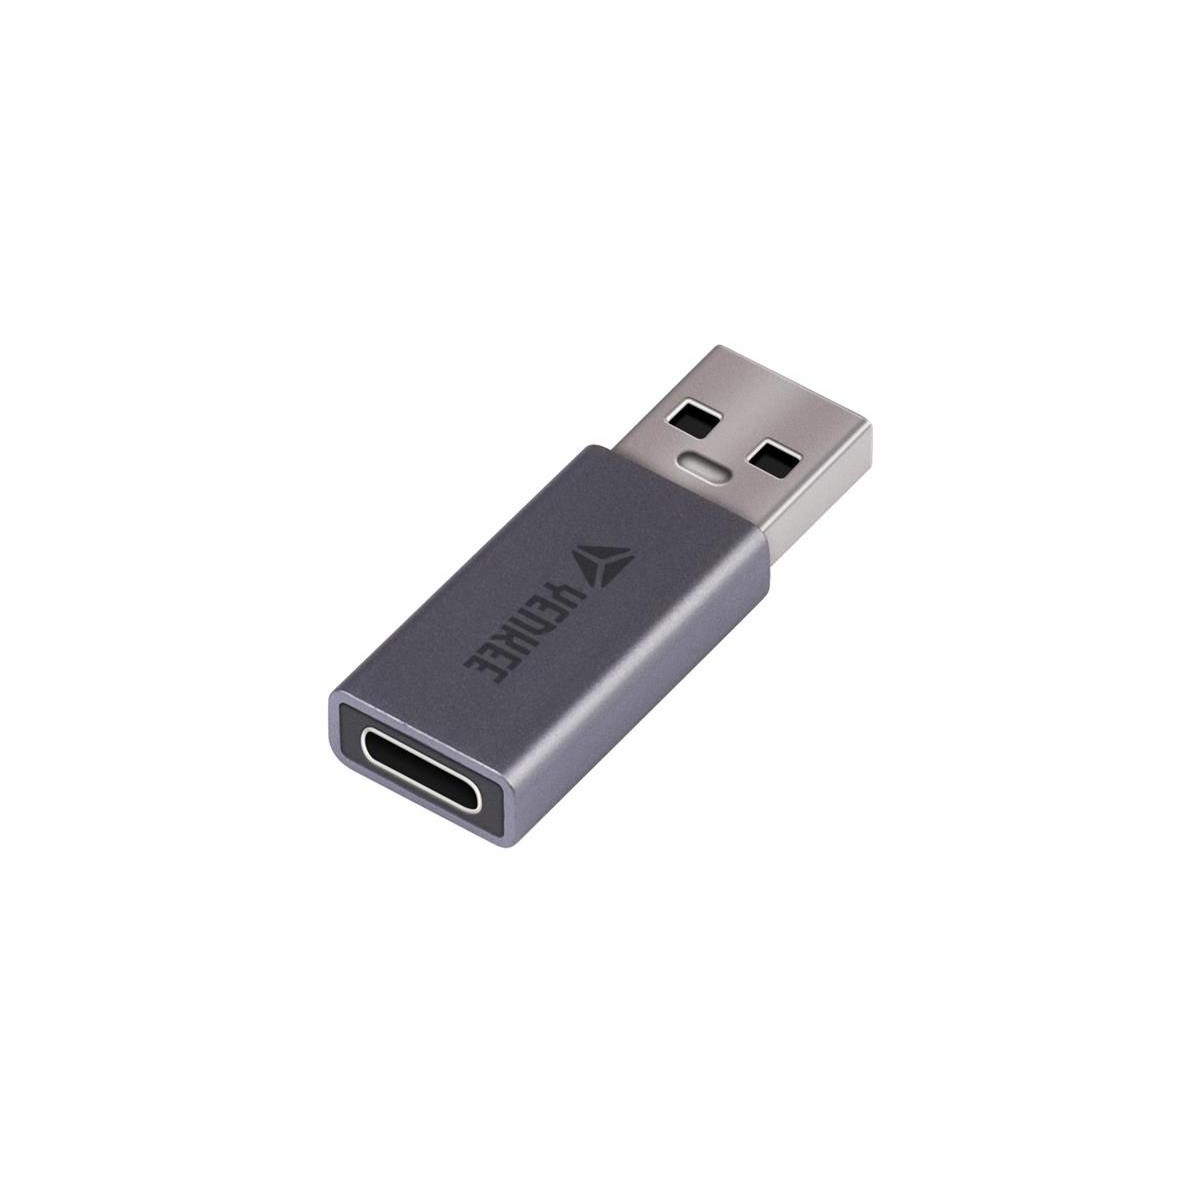 More about Adaptér YENKEE YTC 020 USB-A na USB-C